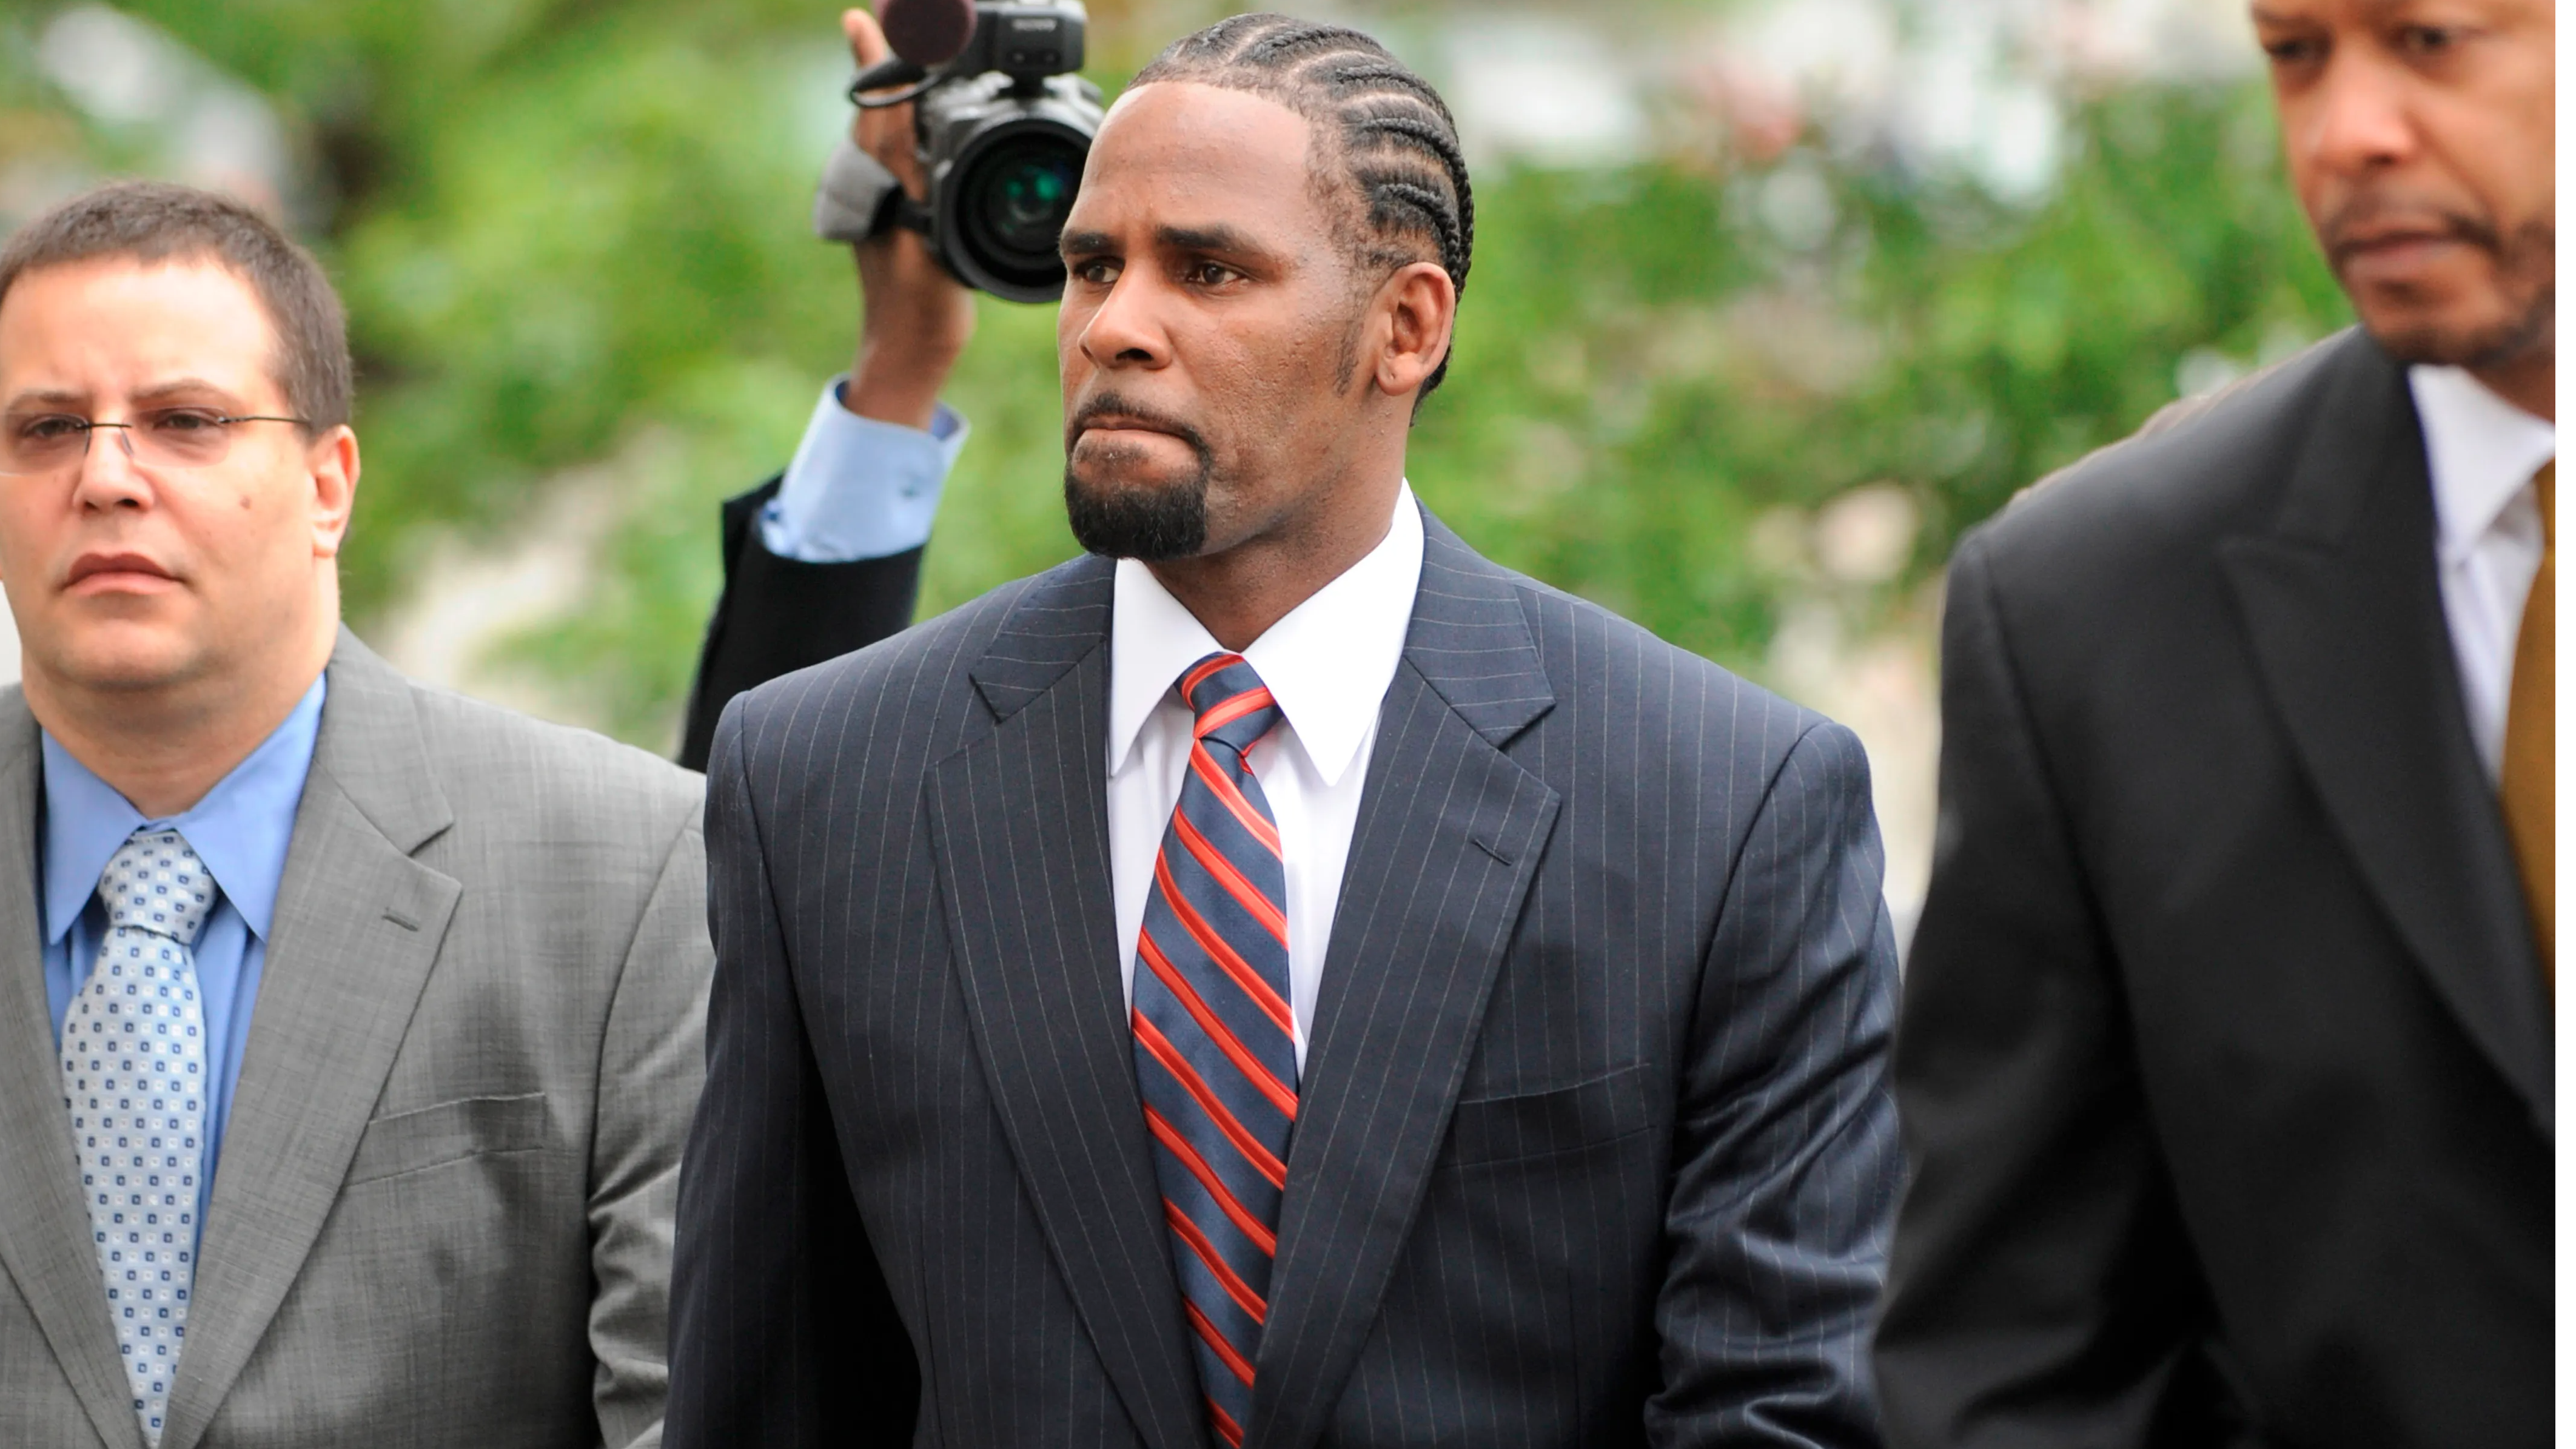 R Kelly trial: 2nd accuser says singer beat her, knowingly gave her herpes